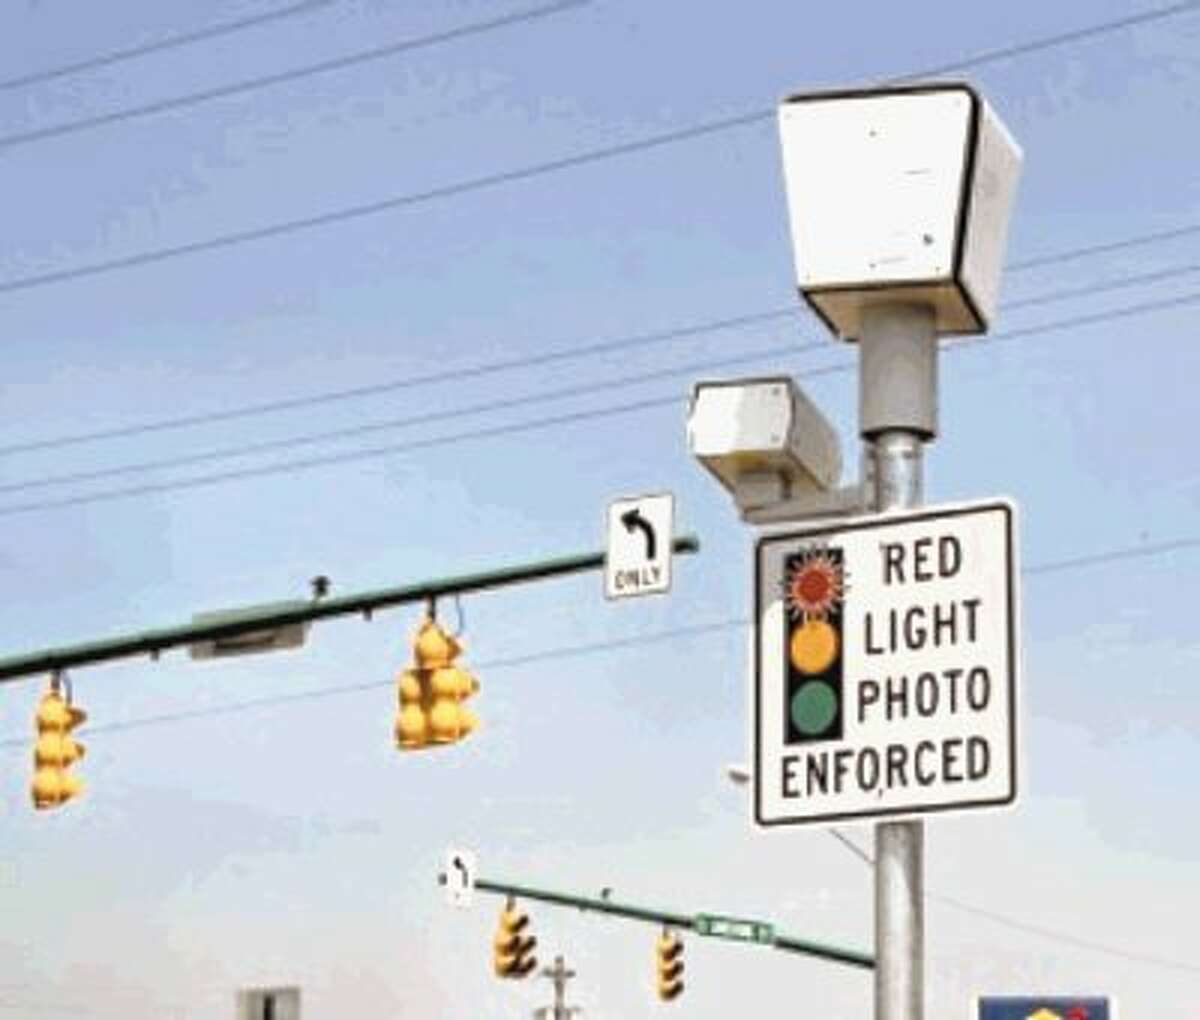 No more: Houston could end redlight camera battle by paying a nearly $5 million settlement.